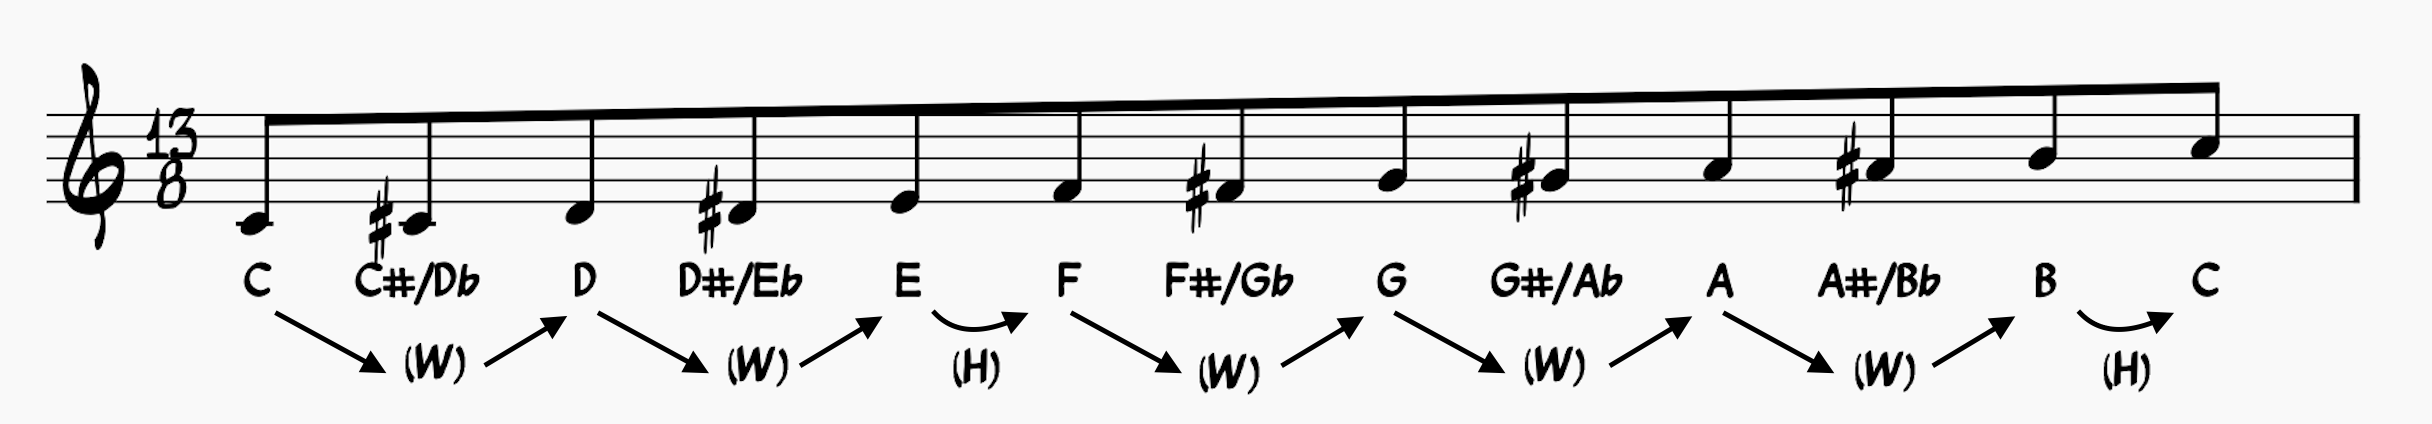 Major Scale Formula imposed over the chromatic scale starting on C